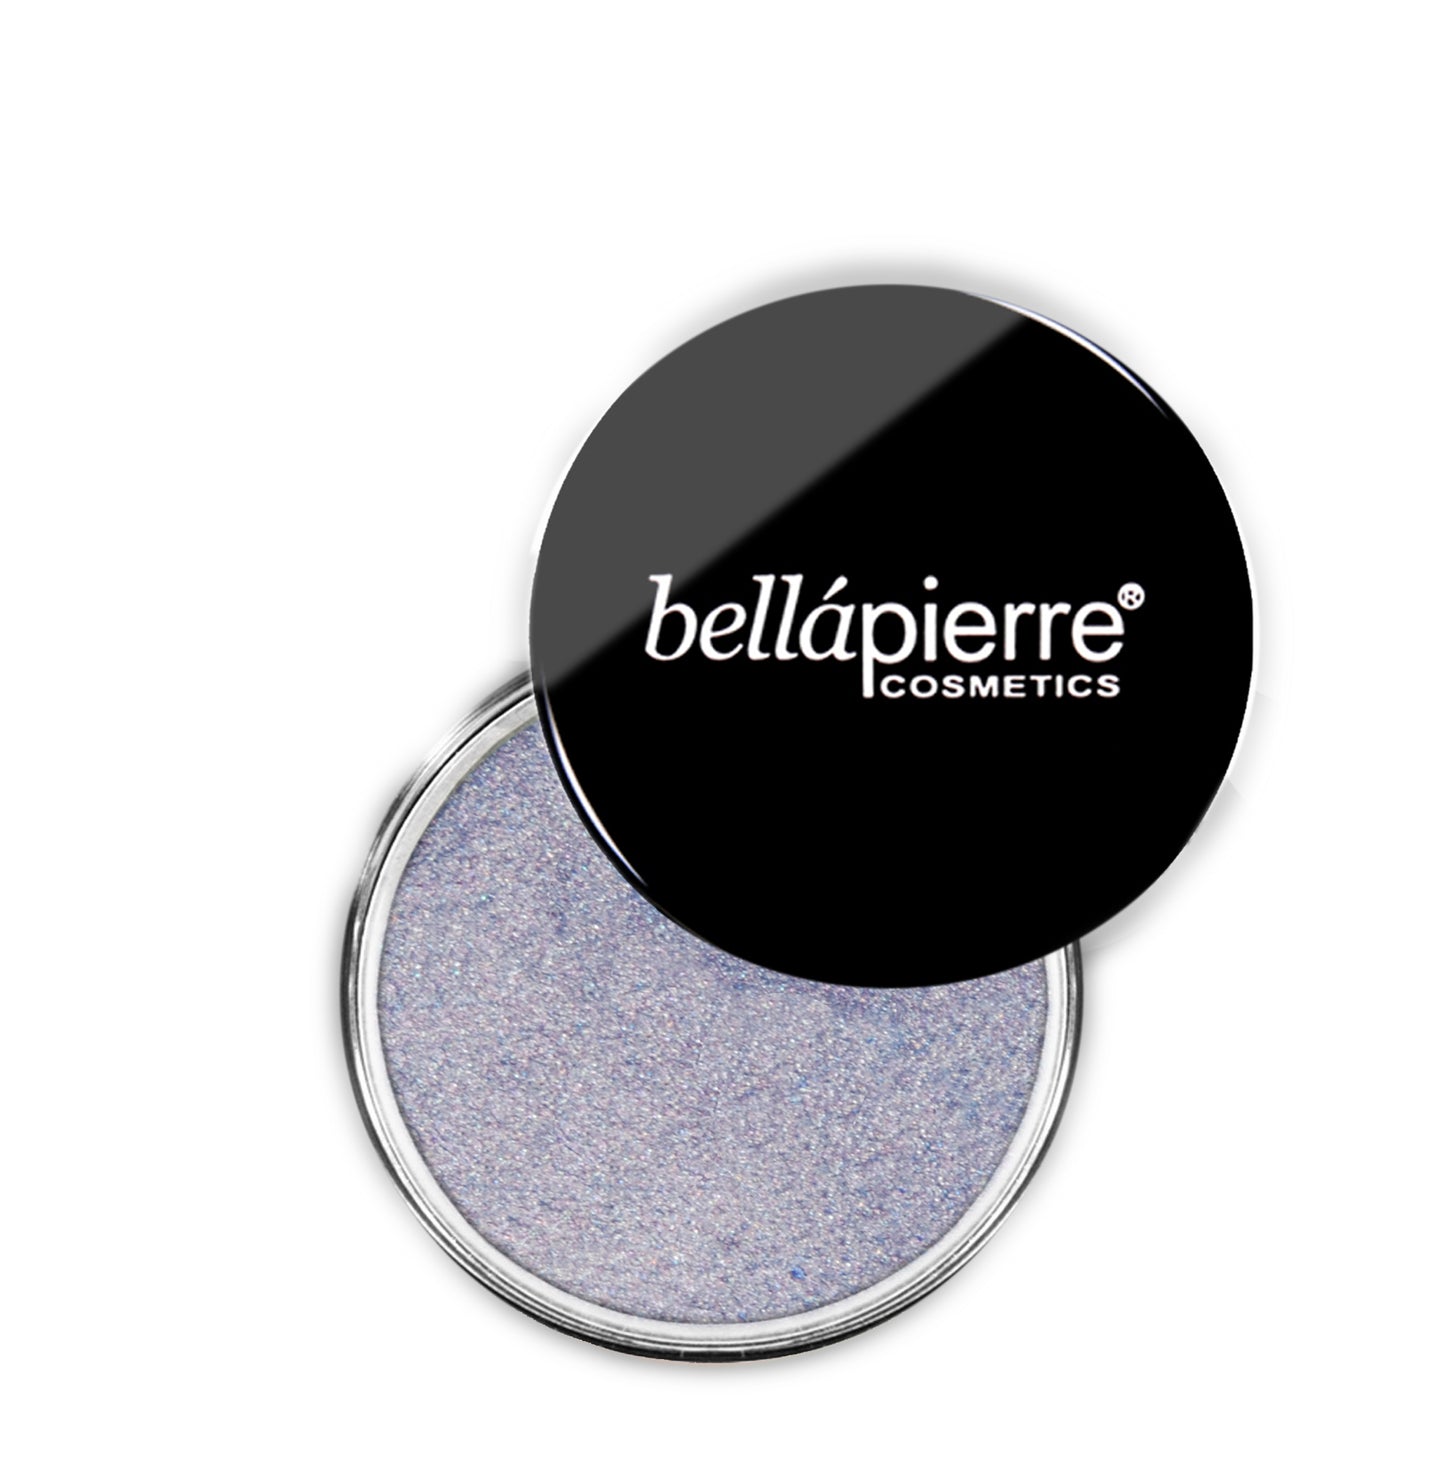 Bellapierre Eye or Lip Shimmer Powder - Lust | 100% pure Mica powder beautiful long lasting, vibrant colour | Cruelty Free Make Up | Mineral Cosmetic |